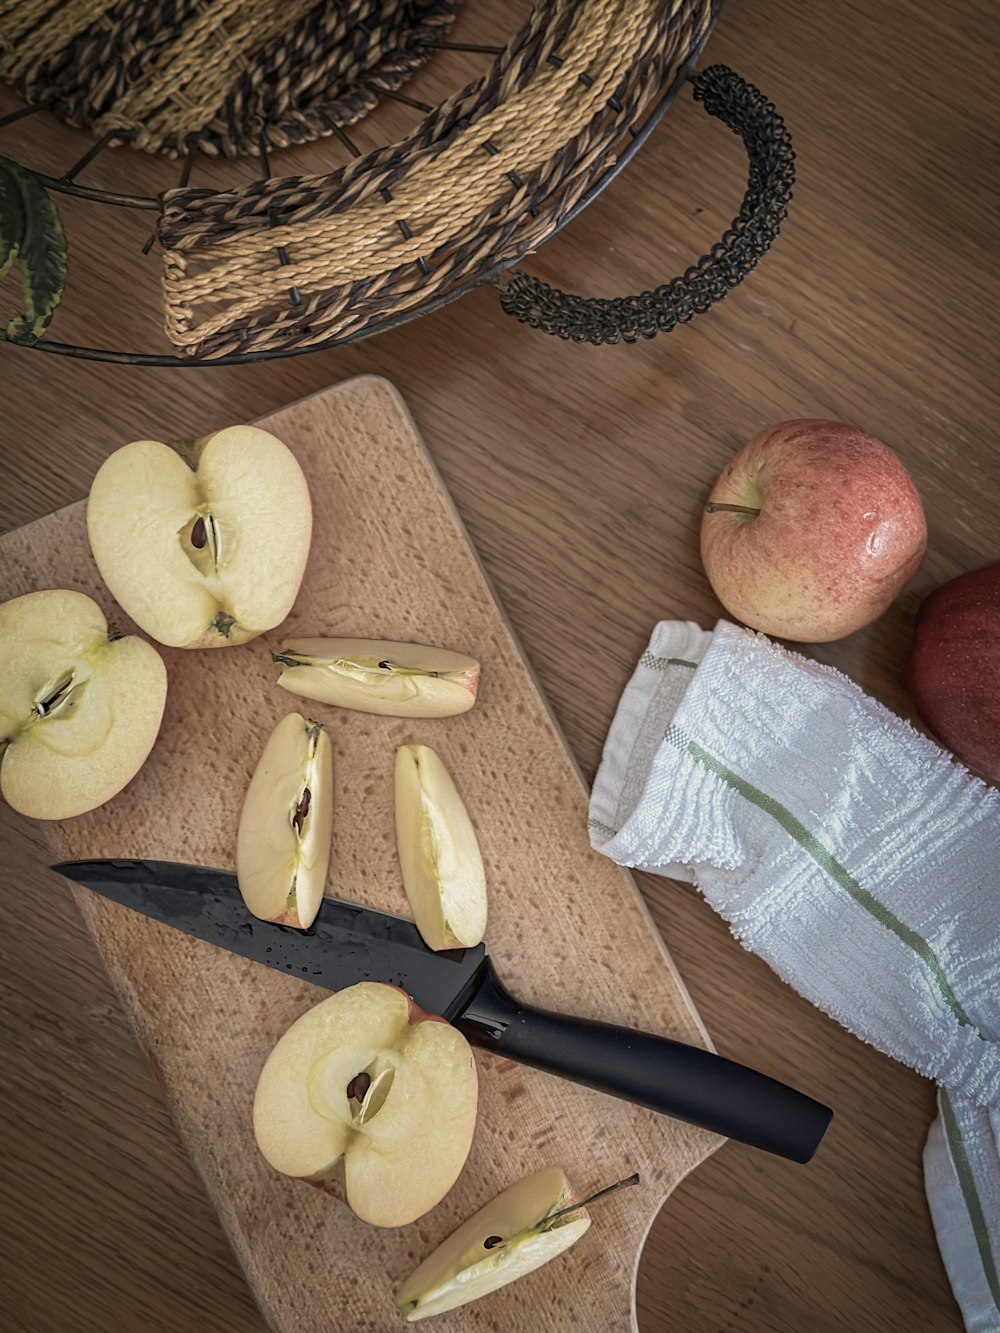 a cutting board topped with sliced apples and a knife